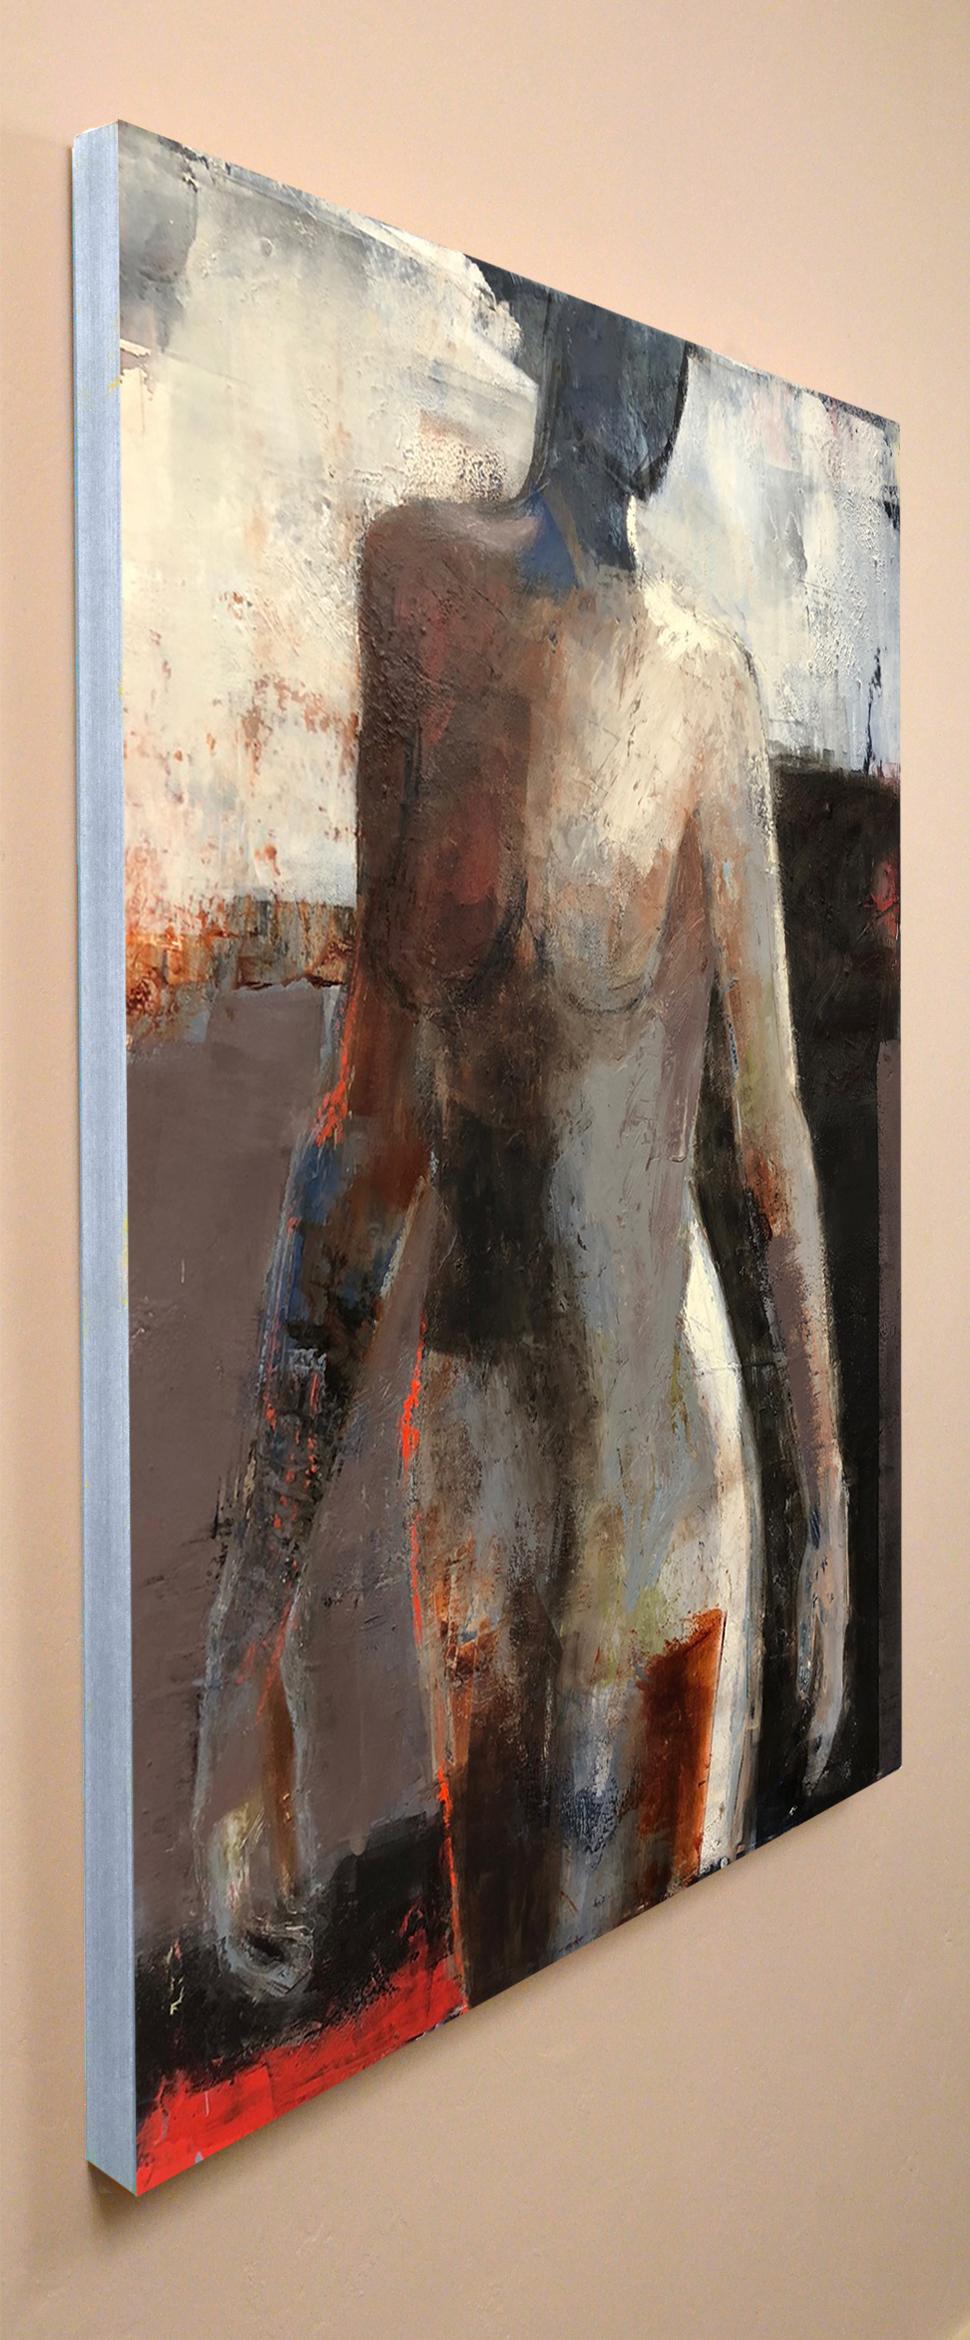 Opening, Mid Century Female Figure in Light, Abstract, Neutral Tones - Painting by Melinda Cootsona